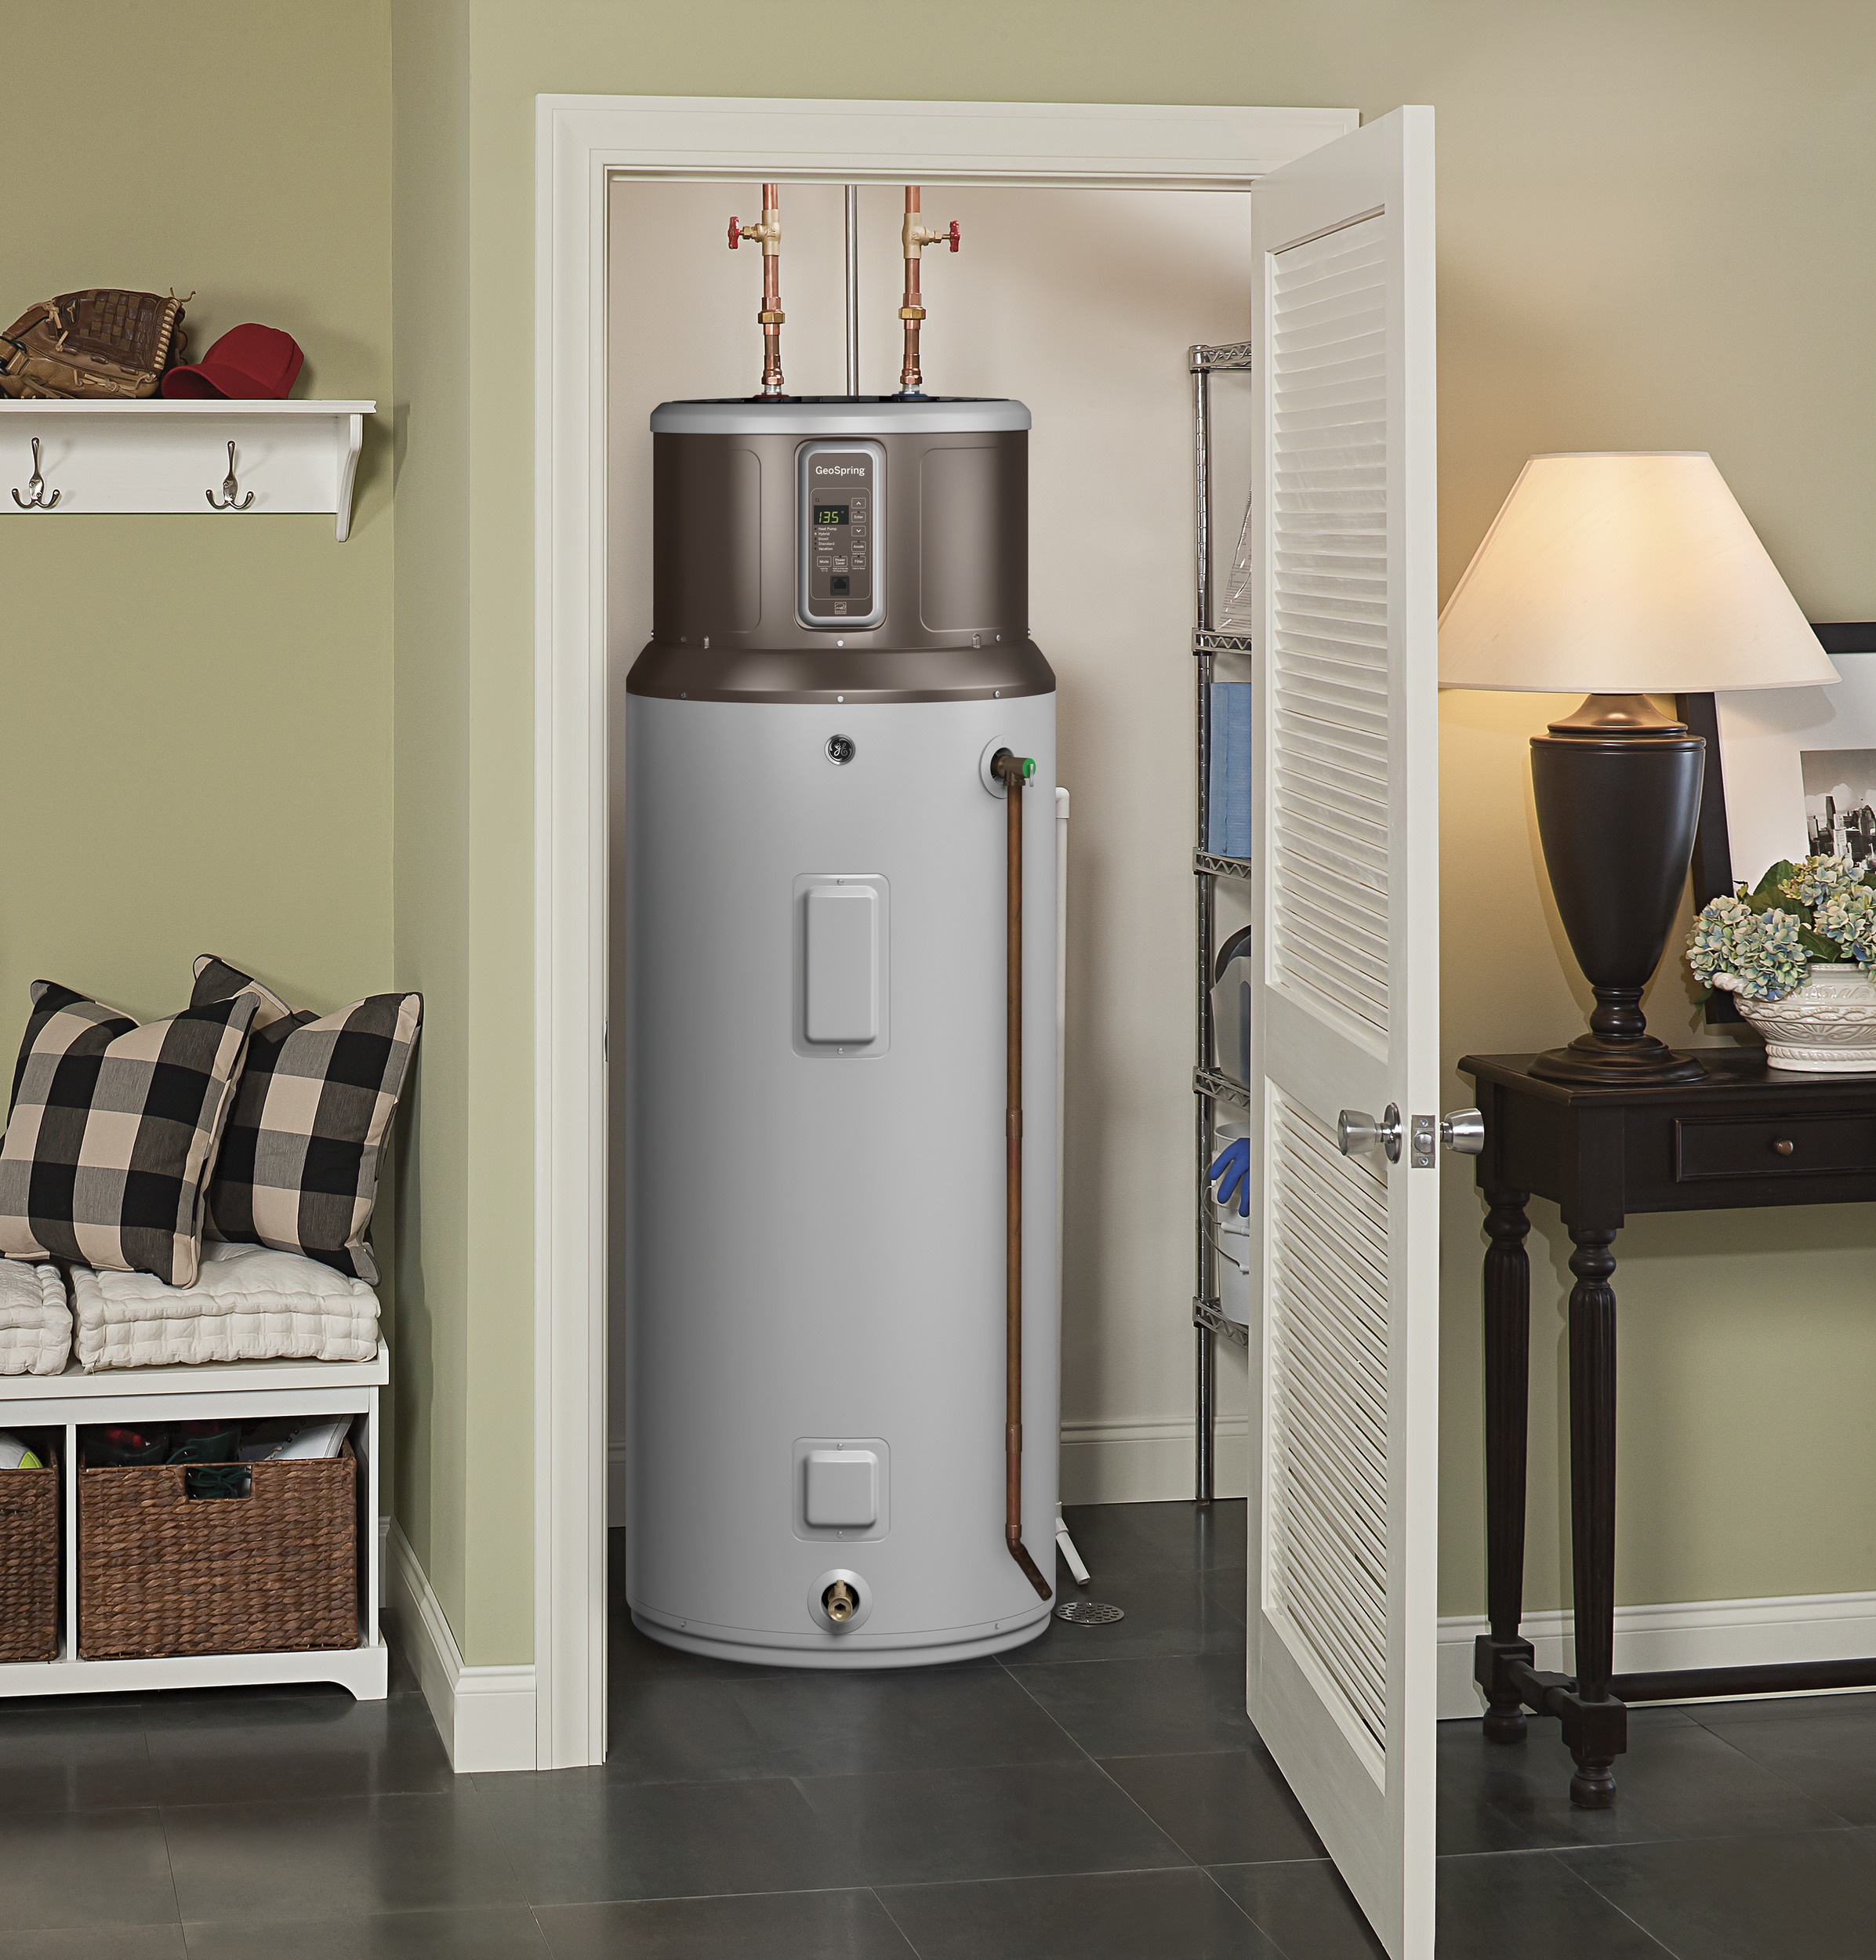 Read more about the article New water heating technology comes to market